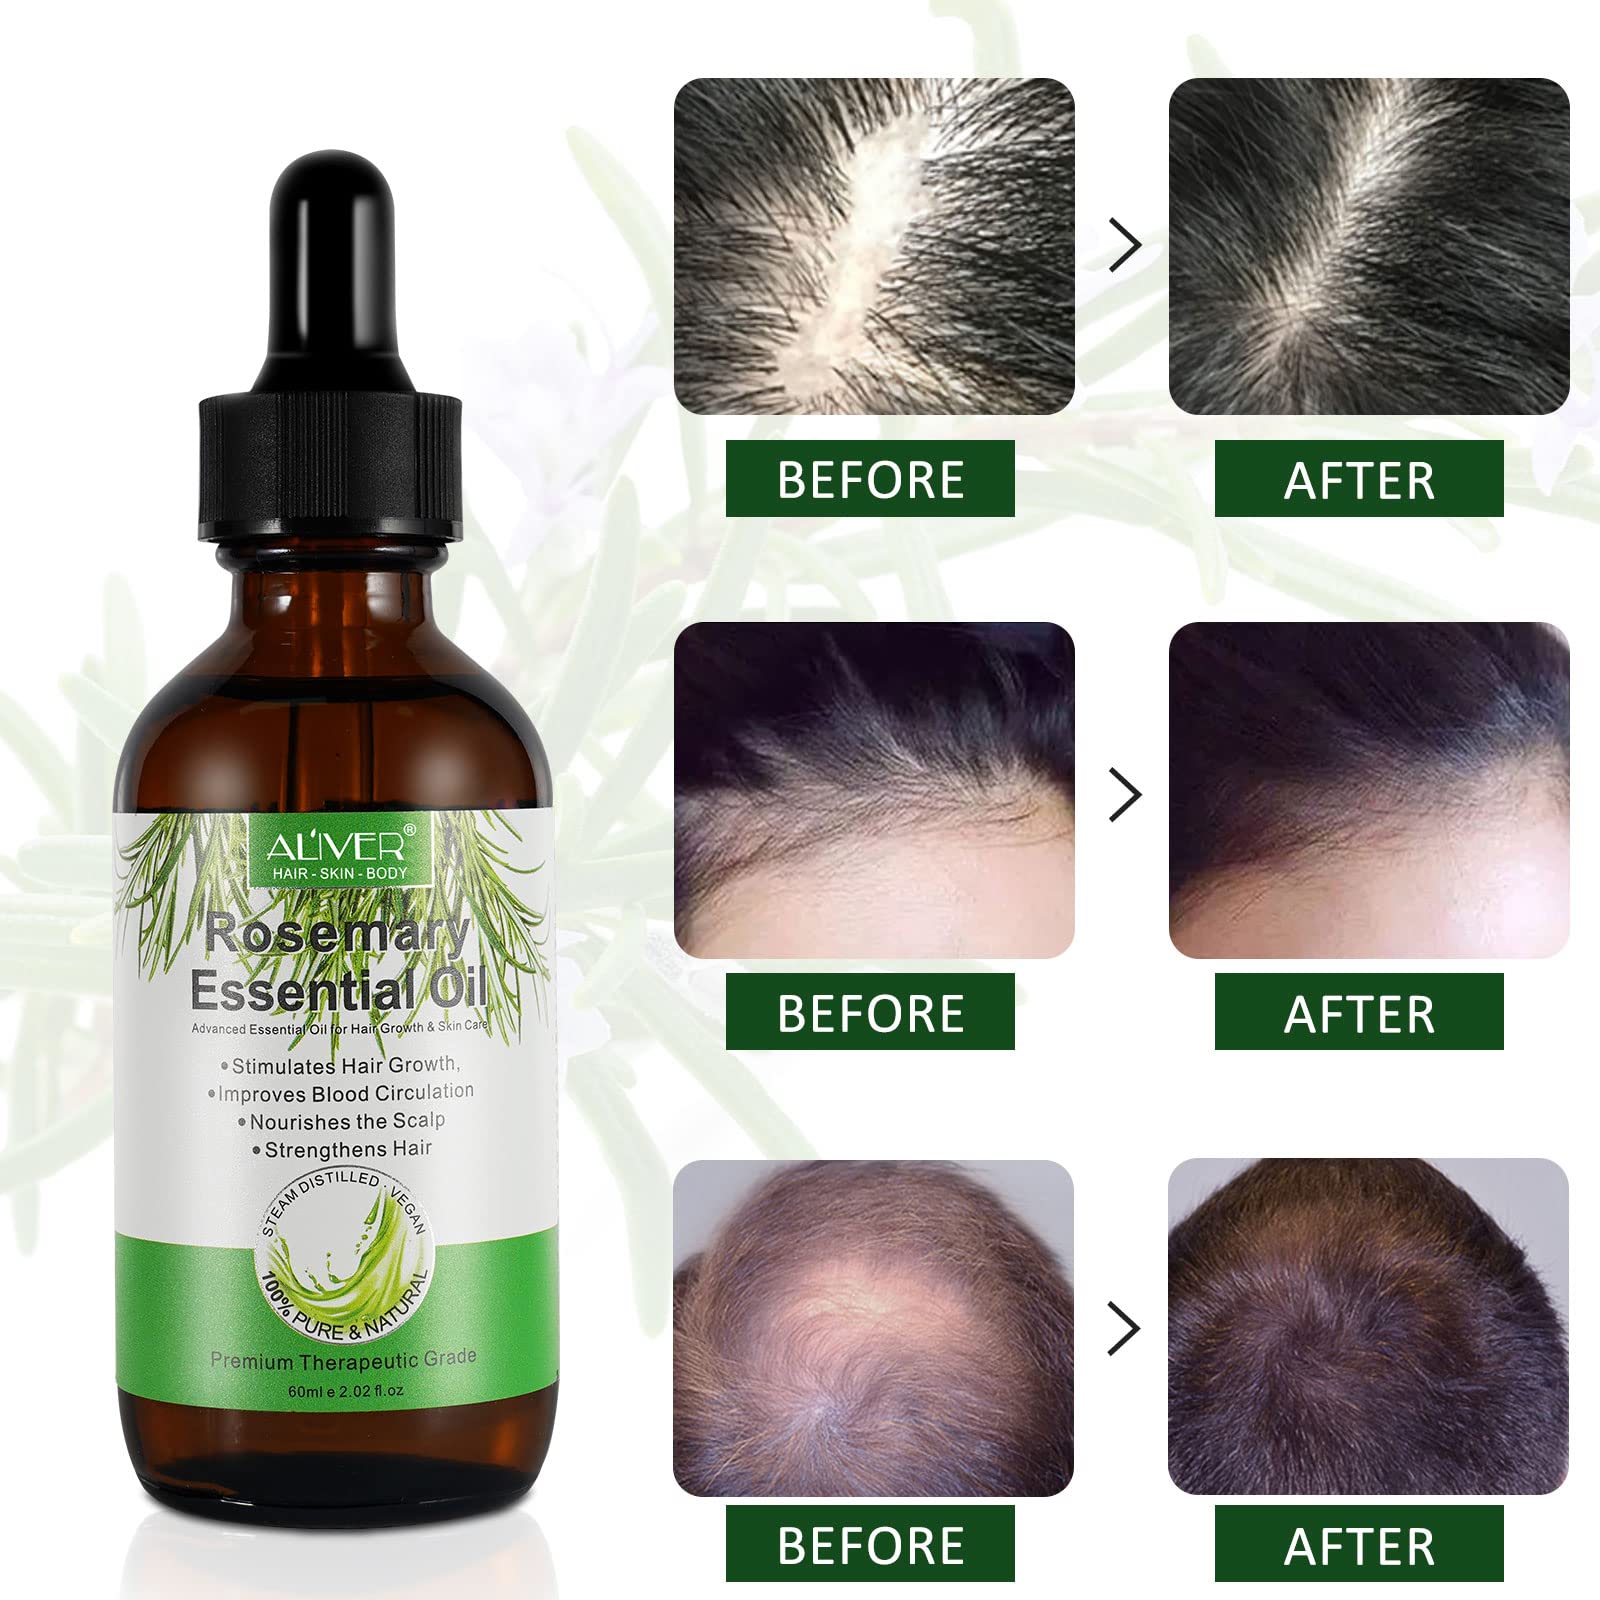 Rosemary Oil for Hair Growth, Organic Rosemary Essential Oils for Skin Care, Nourishes The Scalp,Stimulates Hair Growth, Hair Loss Treatment, Rid of Itchy and Dry Scalp (2.02 fl oz)